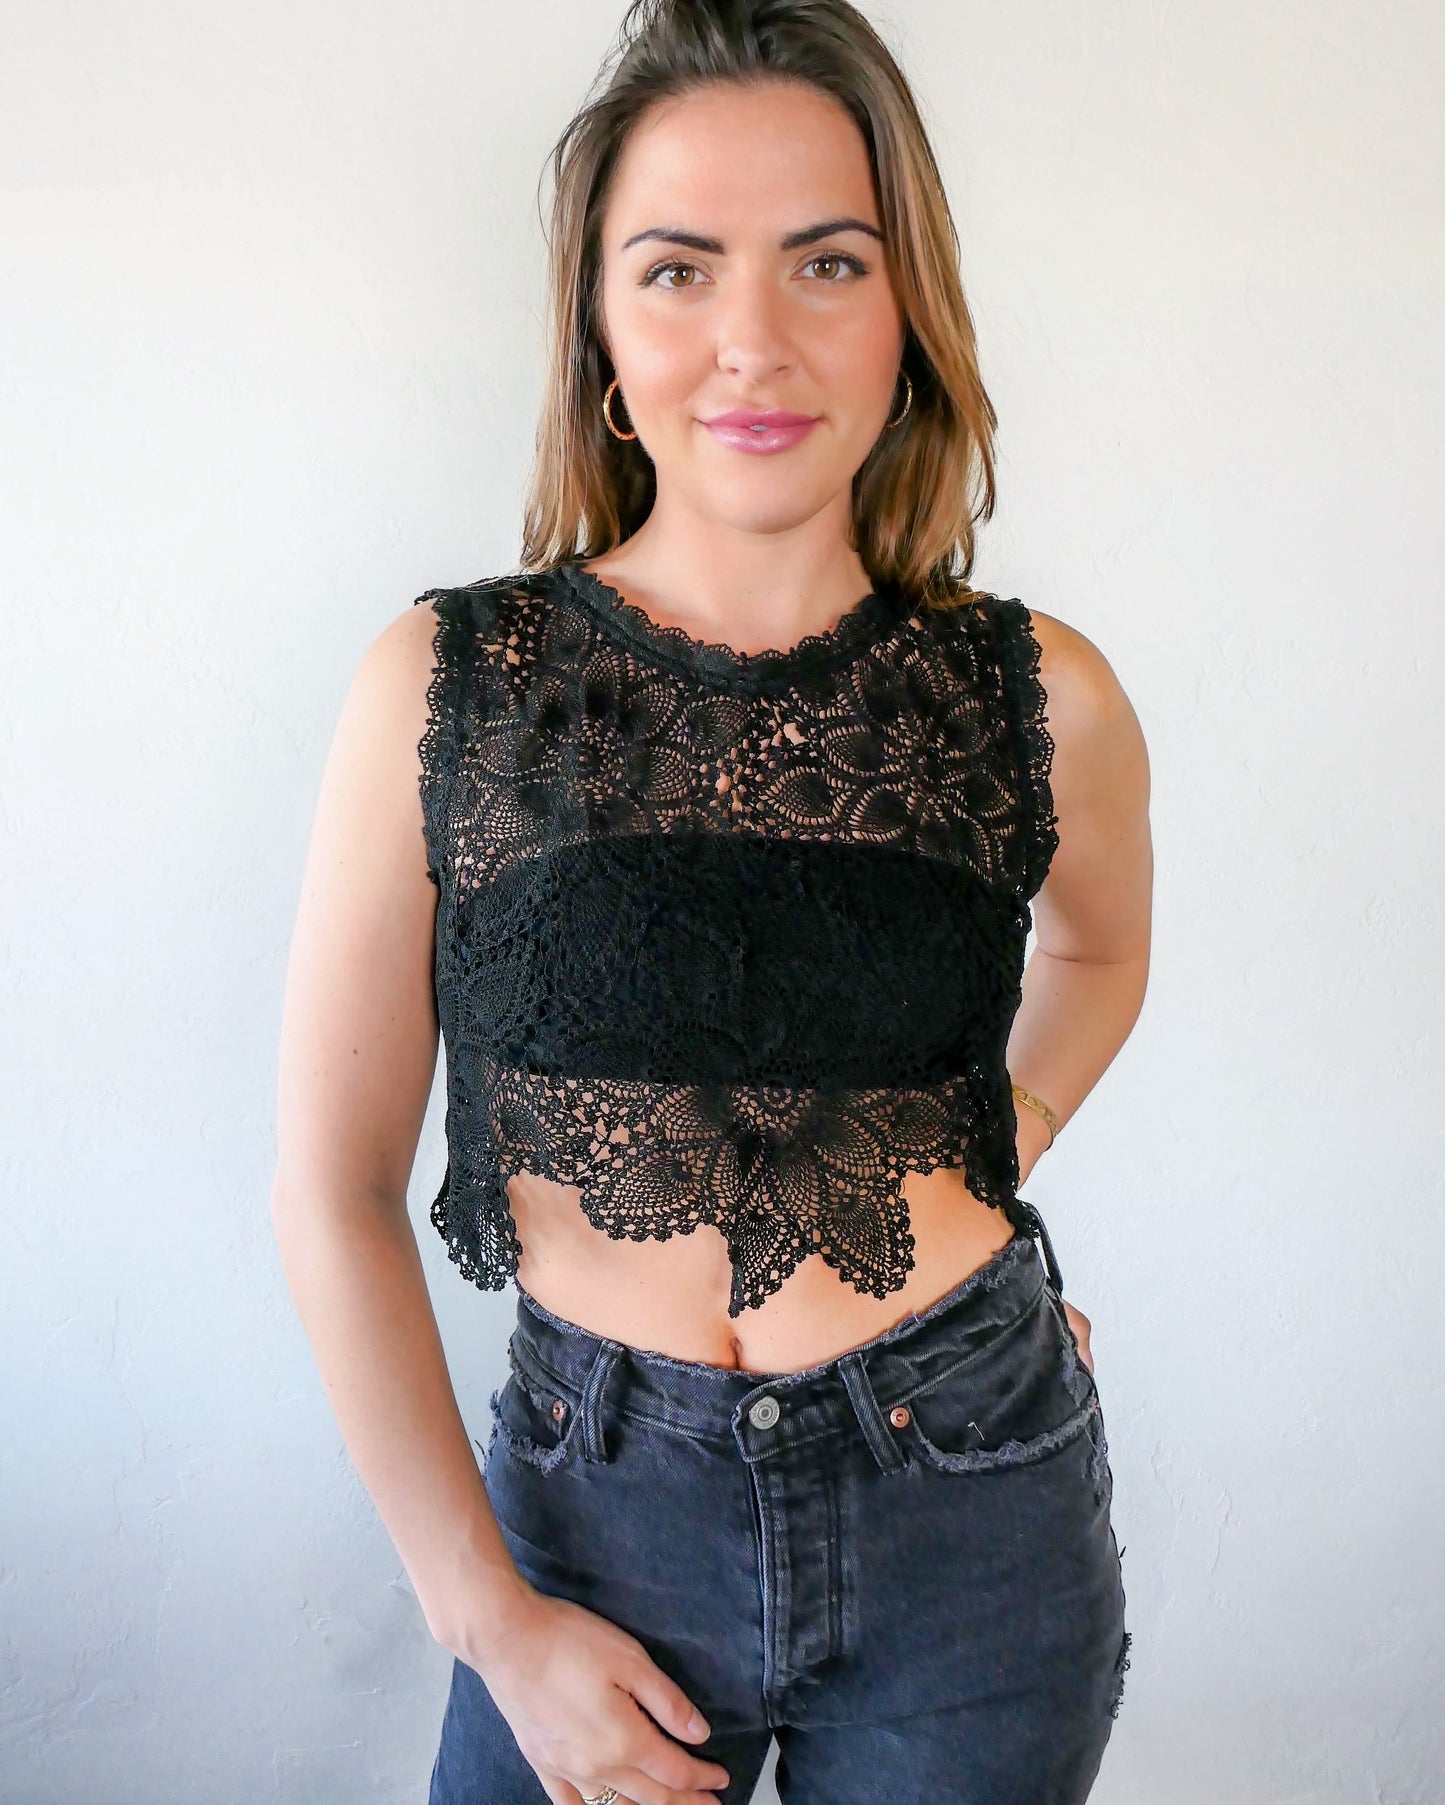 An ultra casual, hip, and boho-chic crop tank top made with interconnected flower doilies reminiscent of the white lotus, which symbolizes peace, tranquility, and calmness.  Lace trim at the collar and sleeve.  Model is wearing black colored crochet top. 